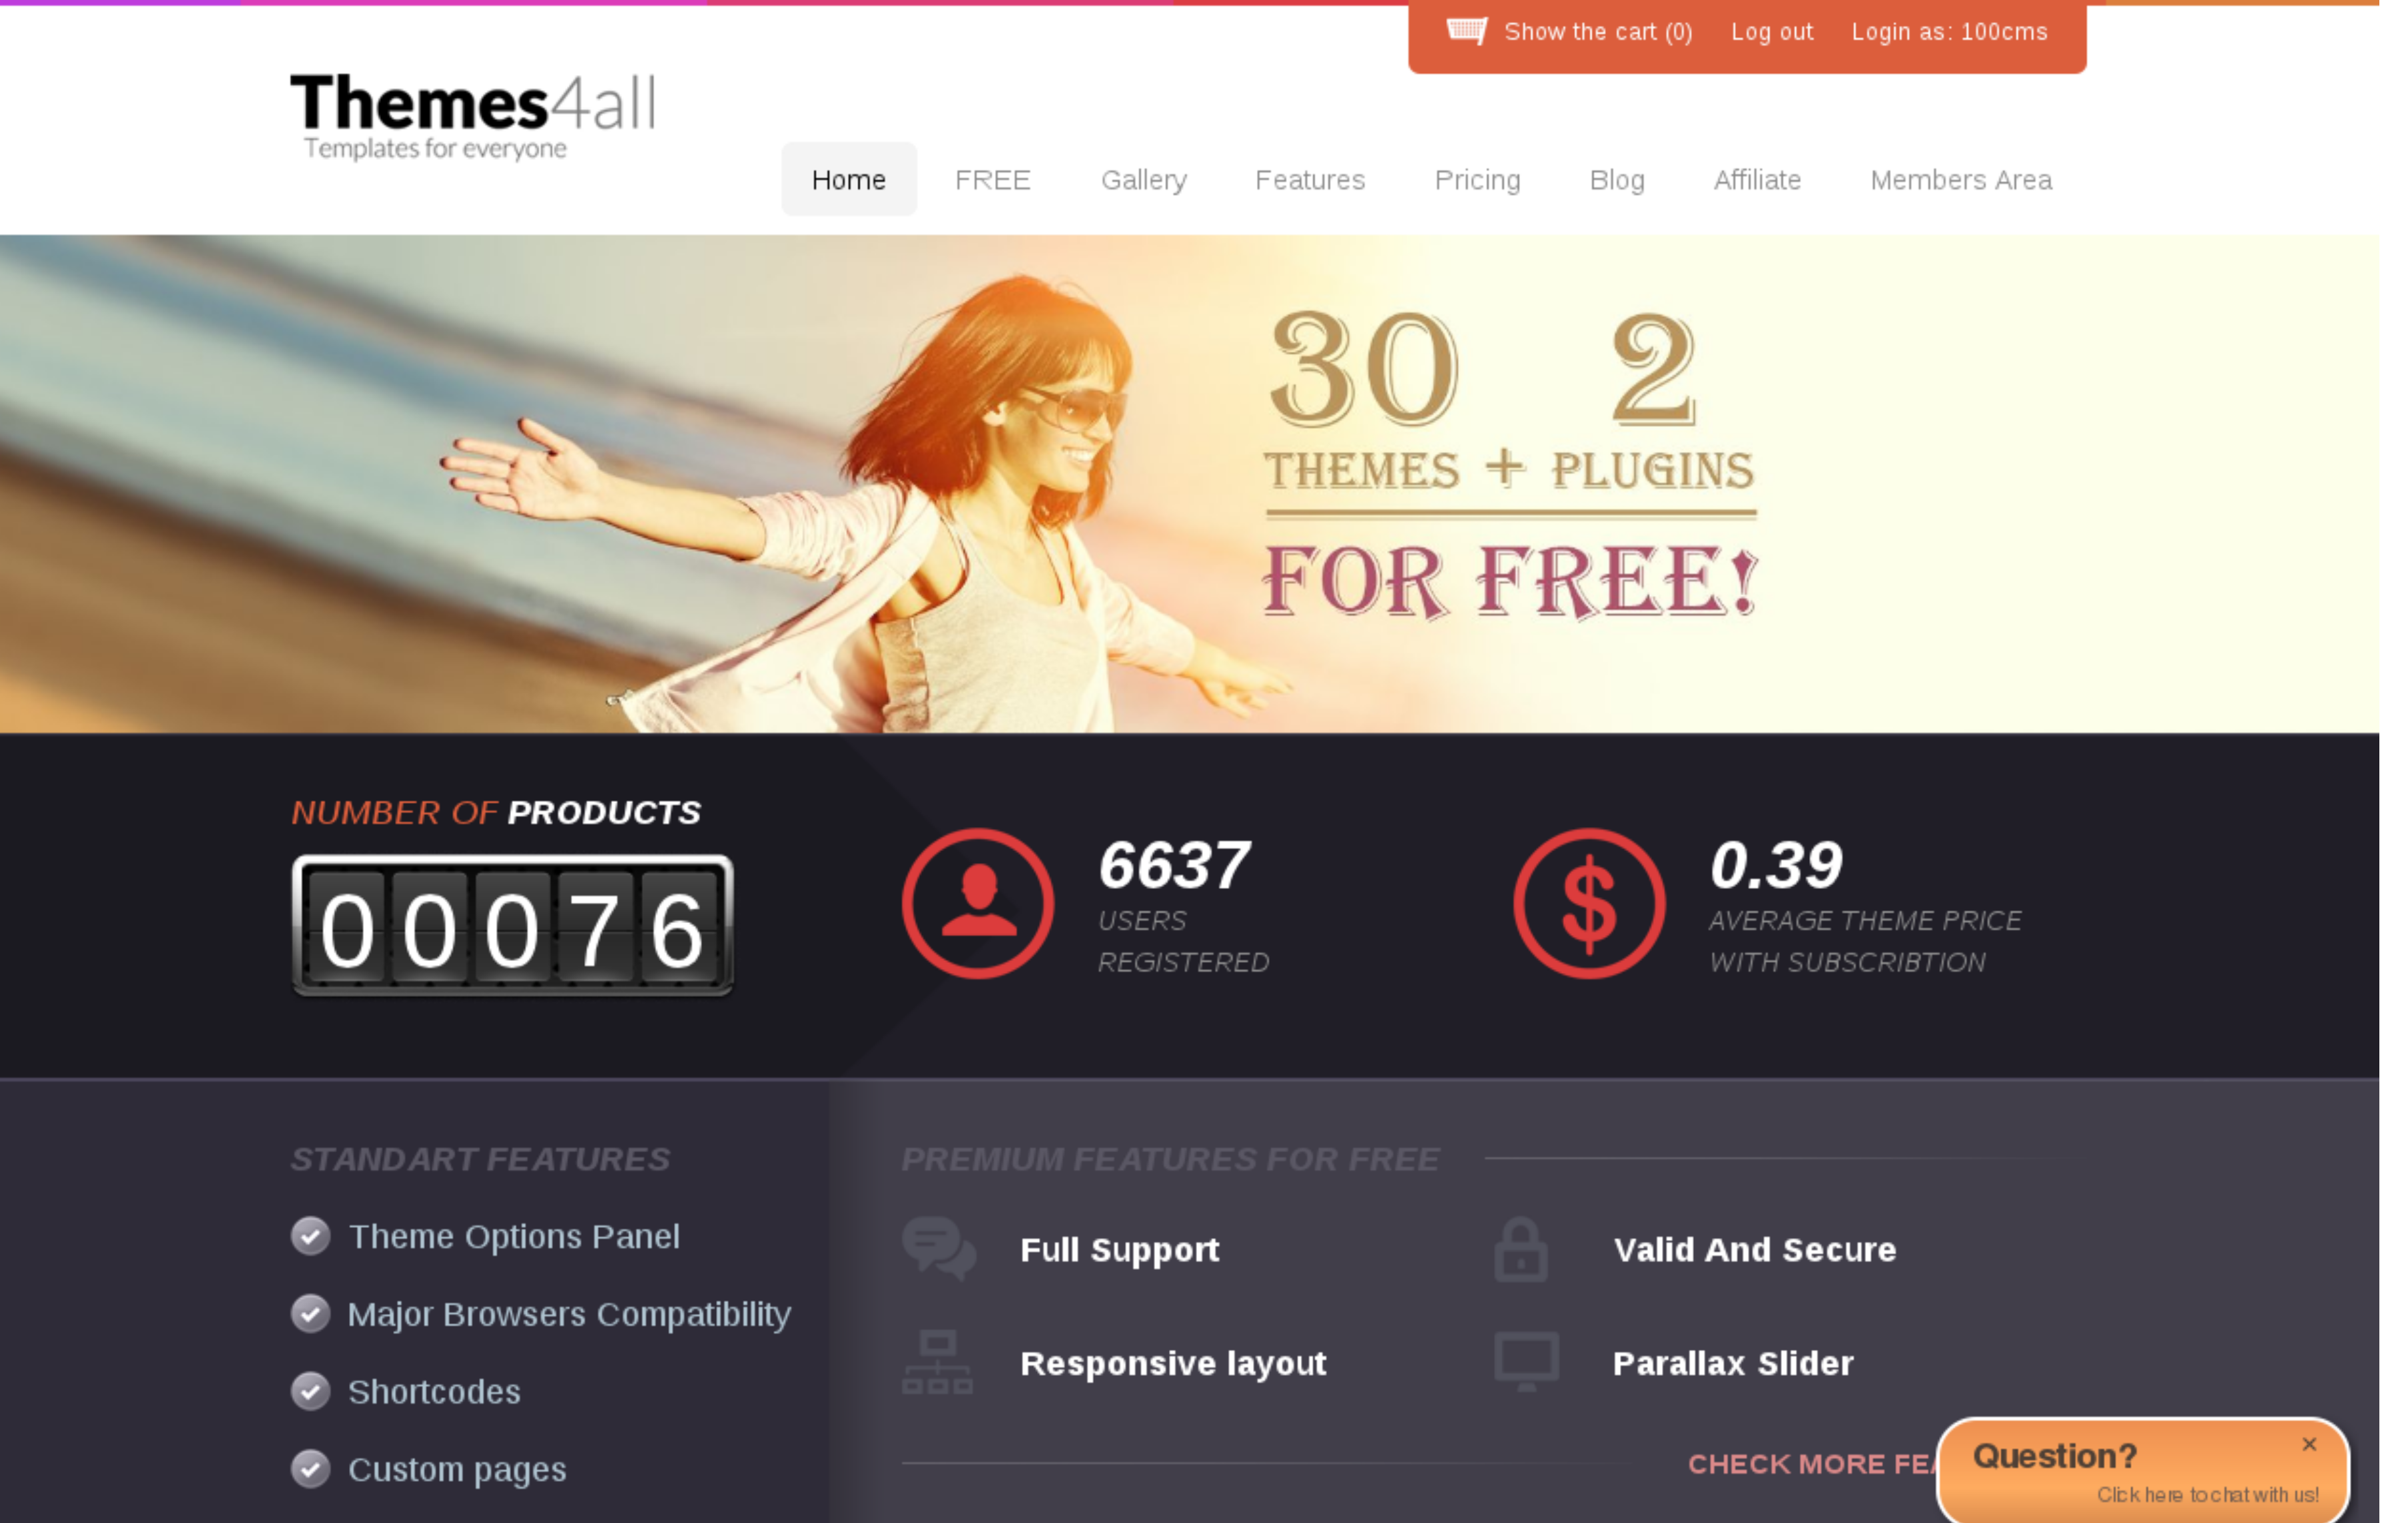 Themes4al WordPress Theme Club with free WordPress Themes and low prices for memberships